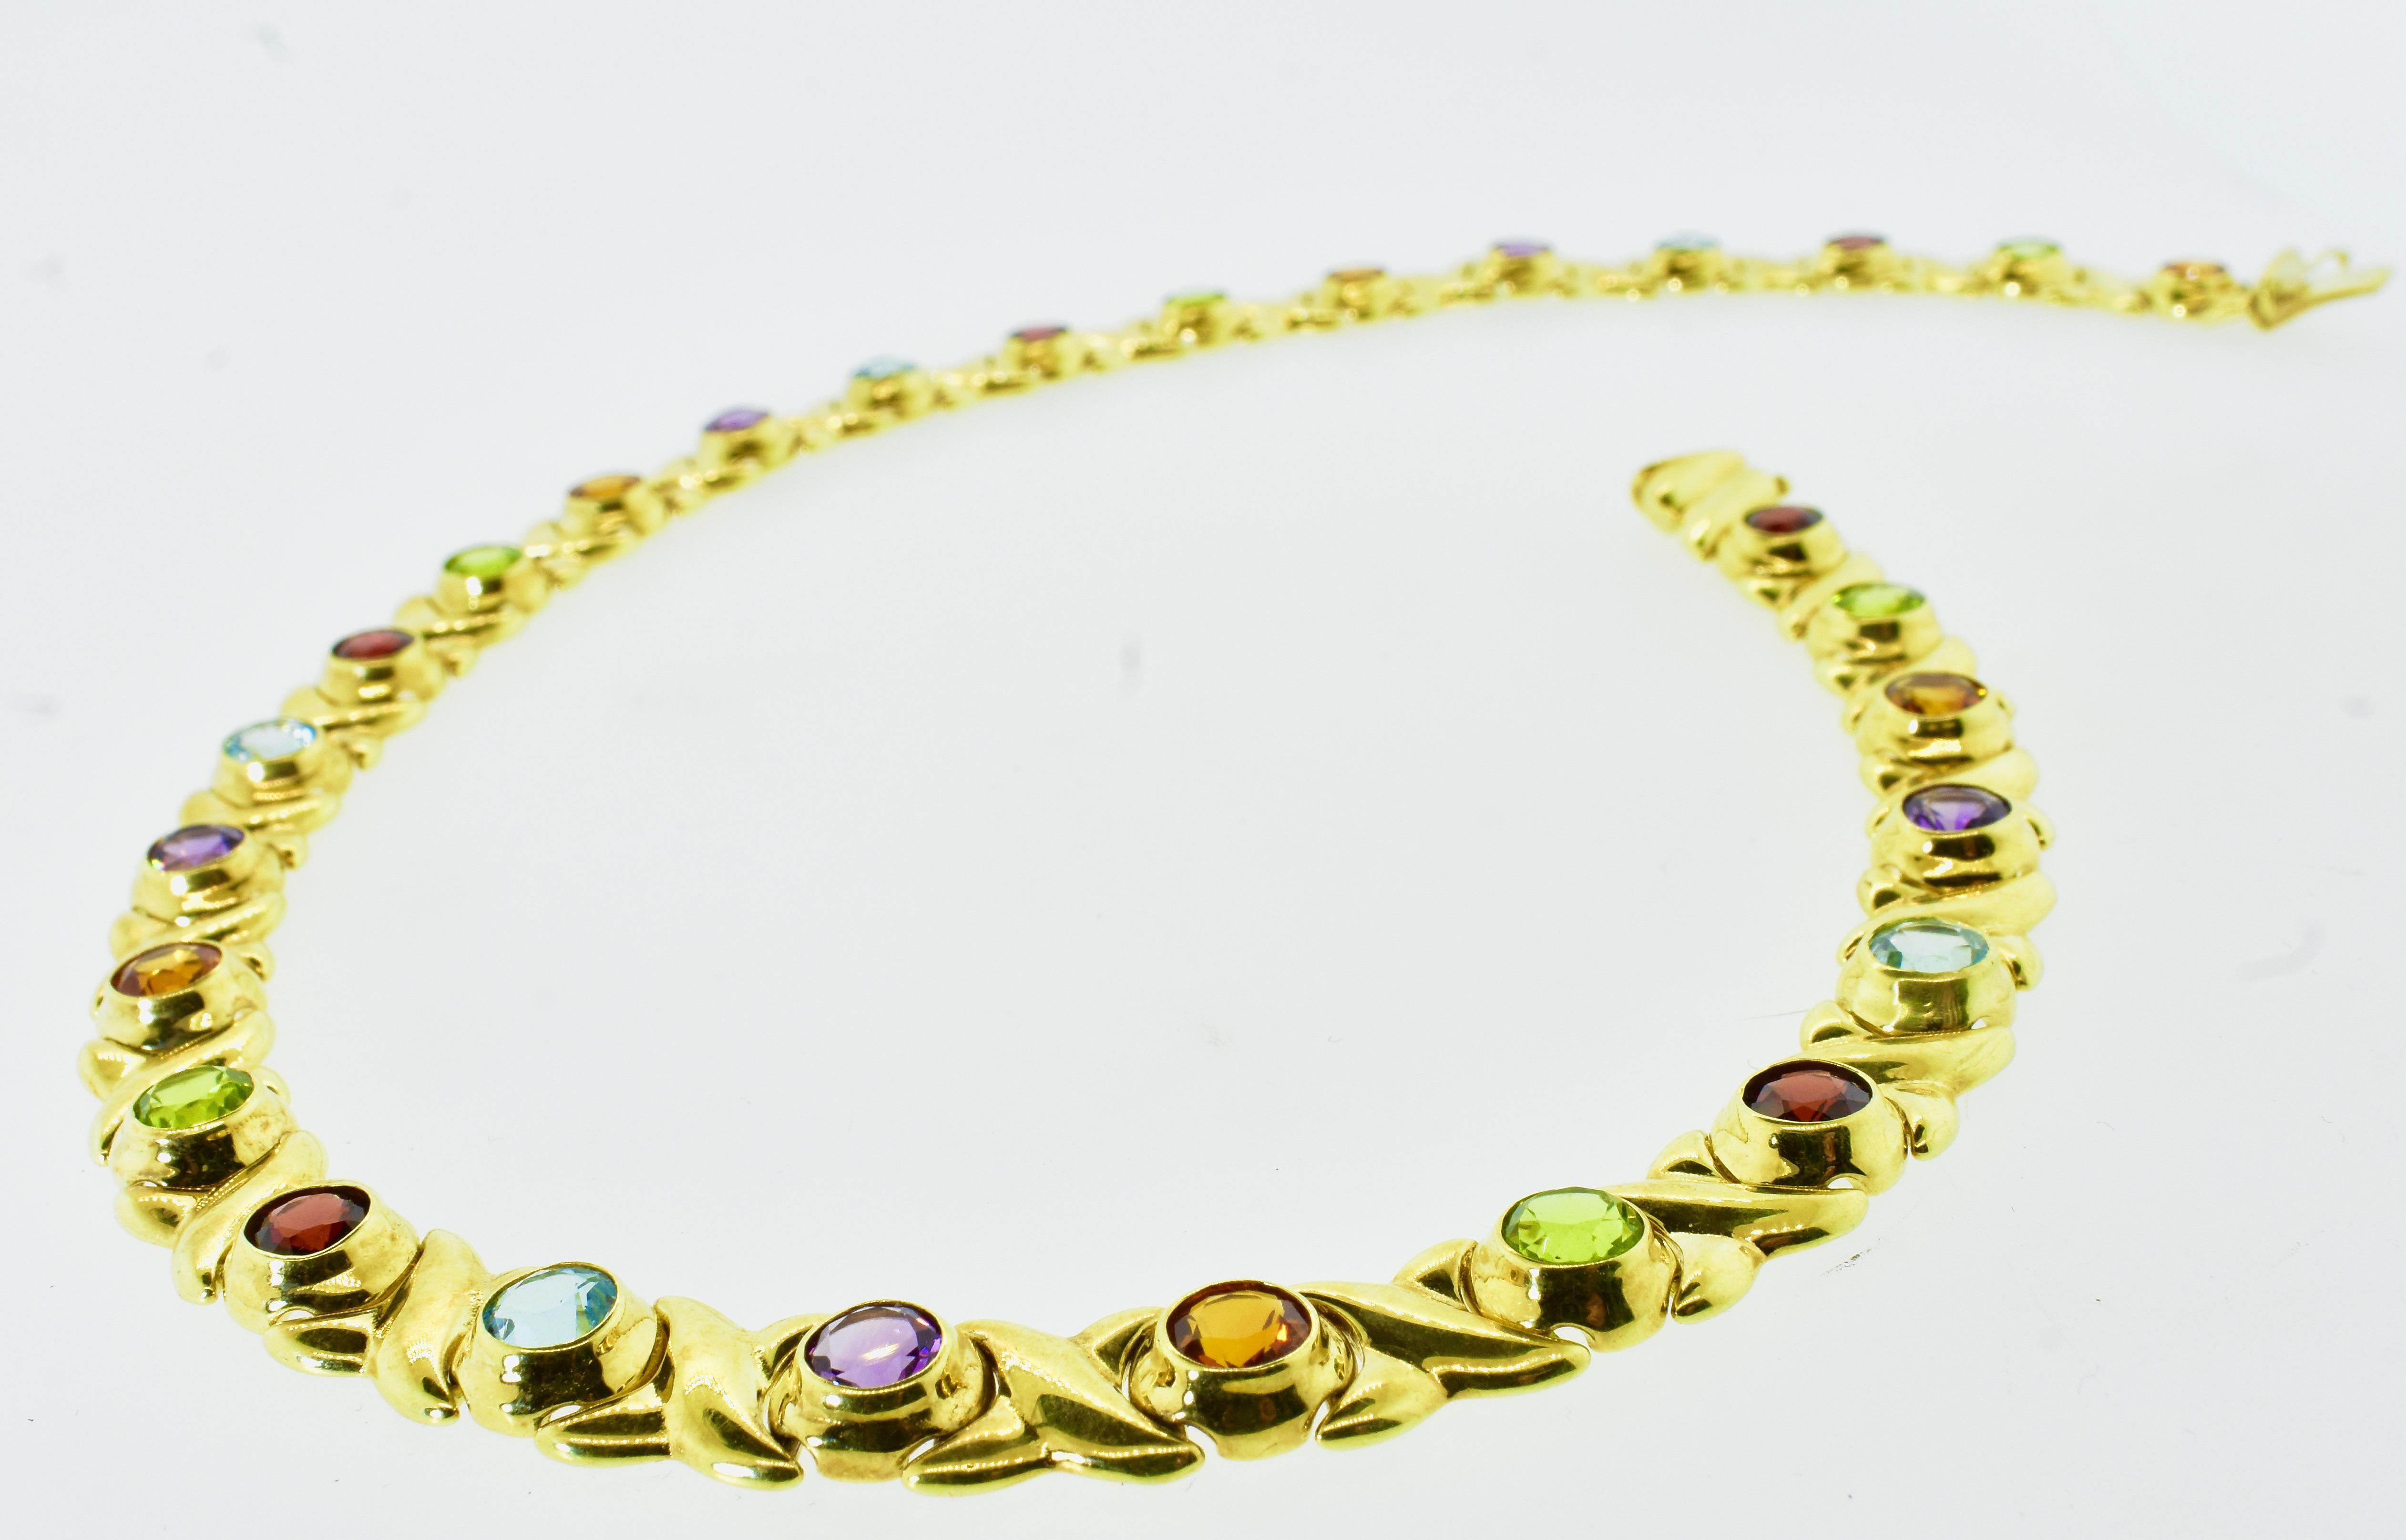 Gem Set Yellow Gold Vintage Necklace with Peridot, Amethyst, Citrine, and Garnet For Sale 7